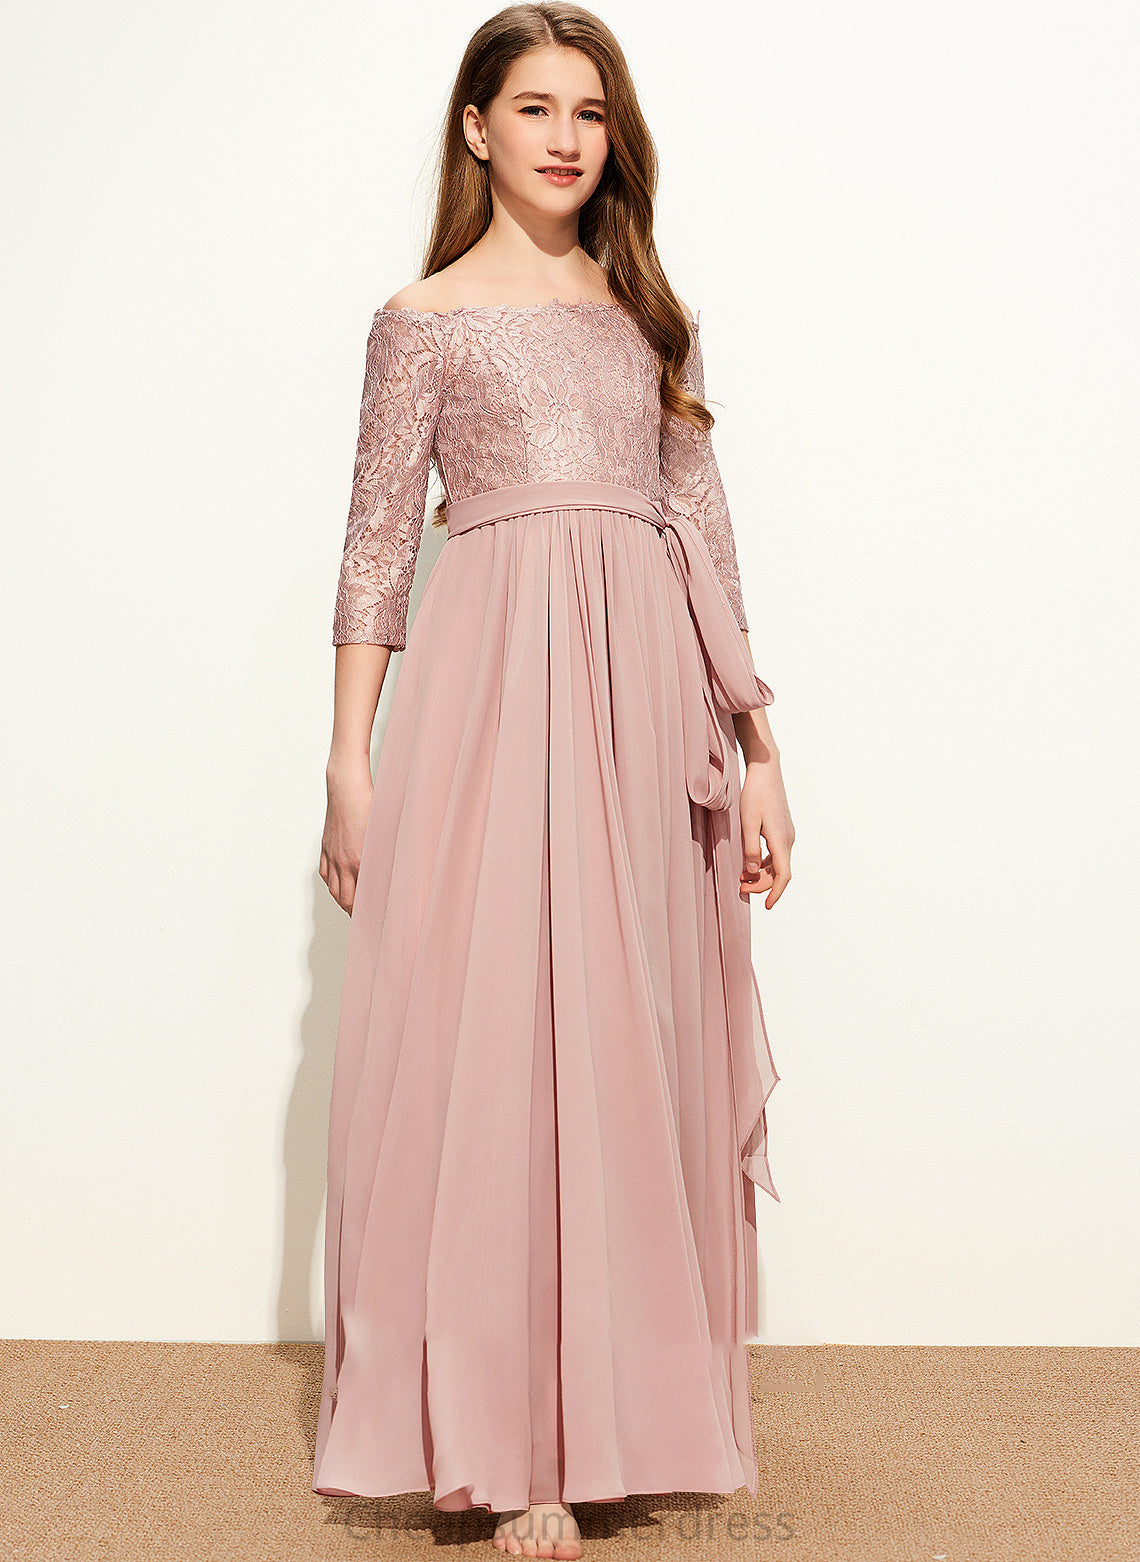 With Junior Bridesmaid Dresses Chiffon Kenzie Floor-Length A-Line Bow(s) Off-the-Shoulder Lace